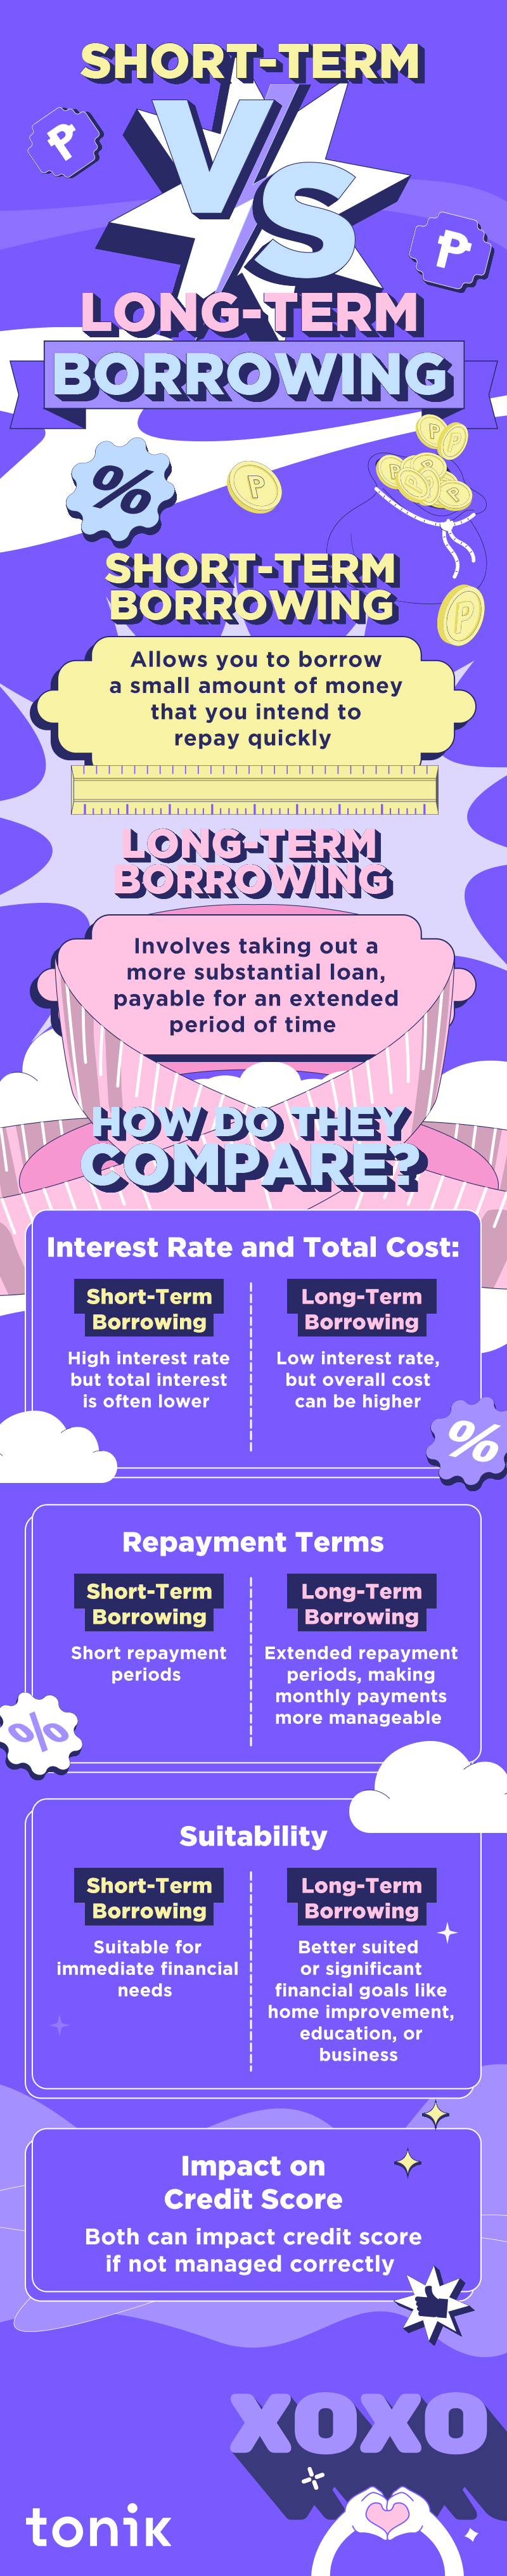 infographic that compares Online Loans vs. Bank Loans